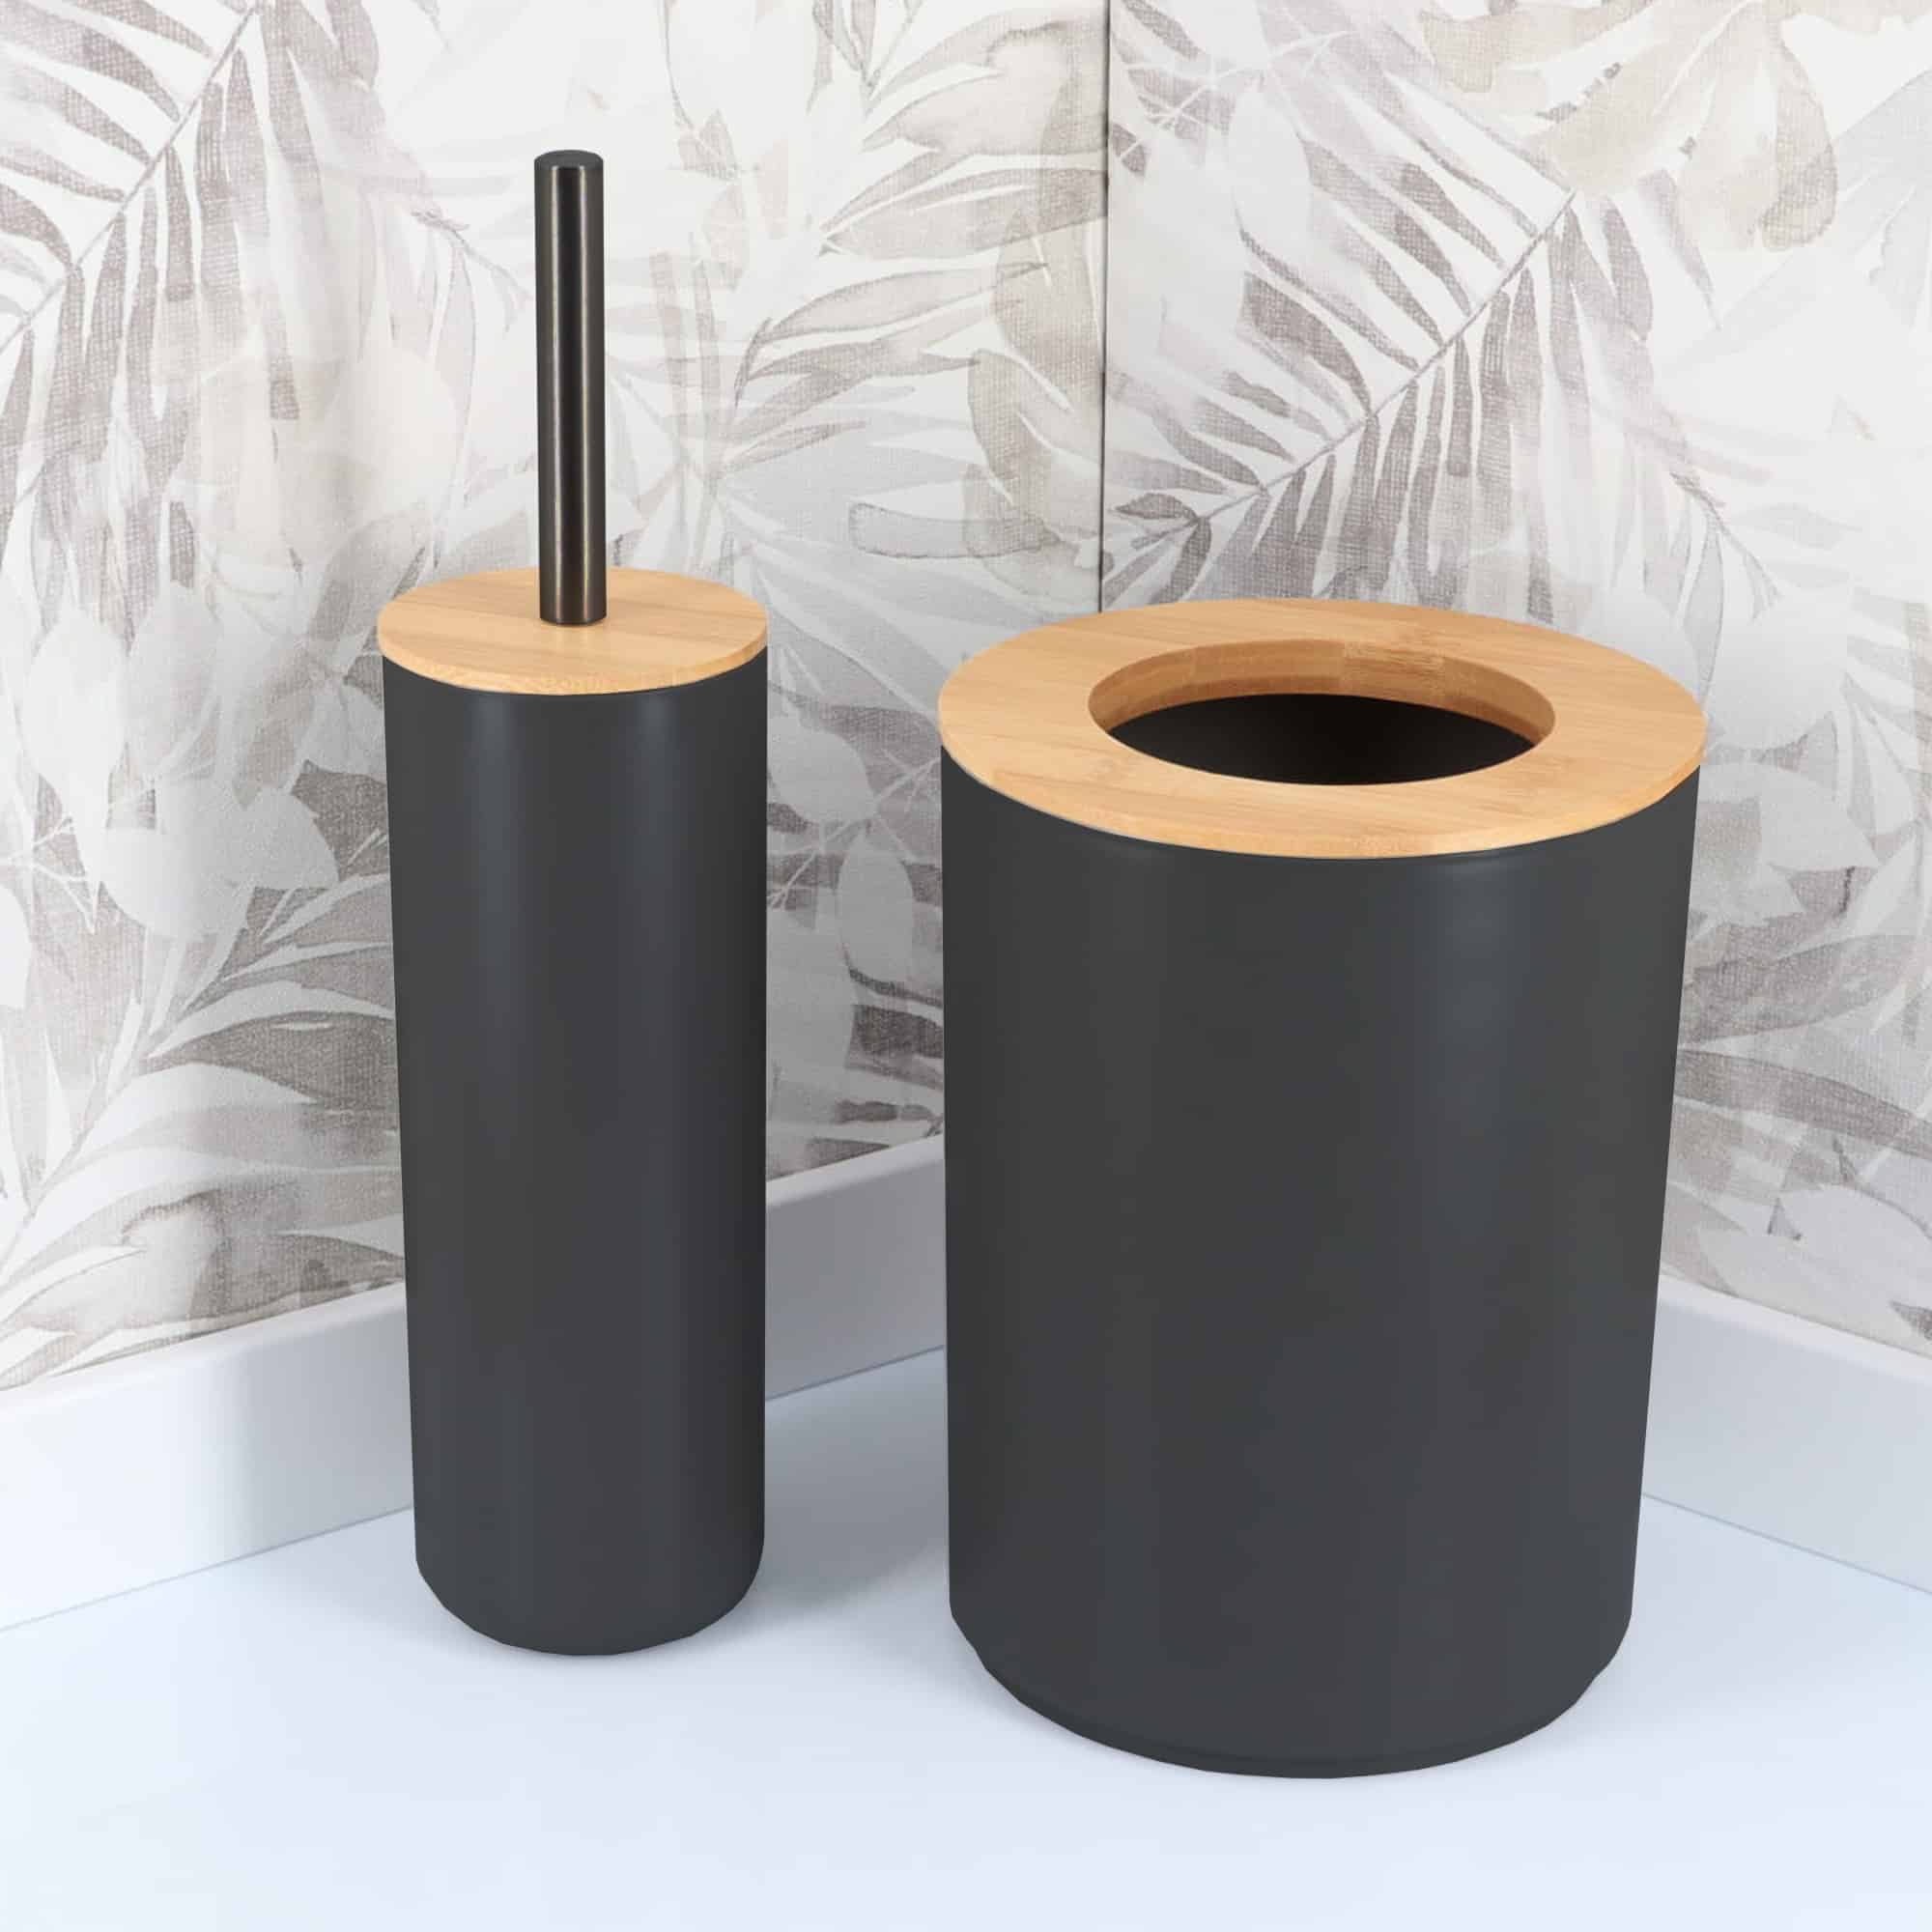 full collection in black and bamboo for bathroom kitchen office